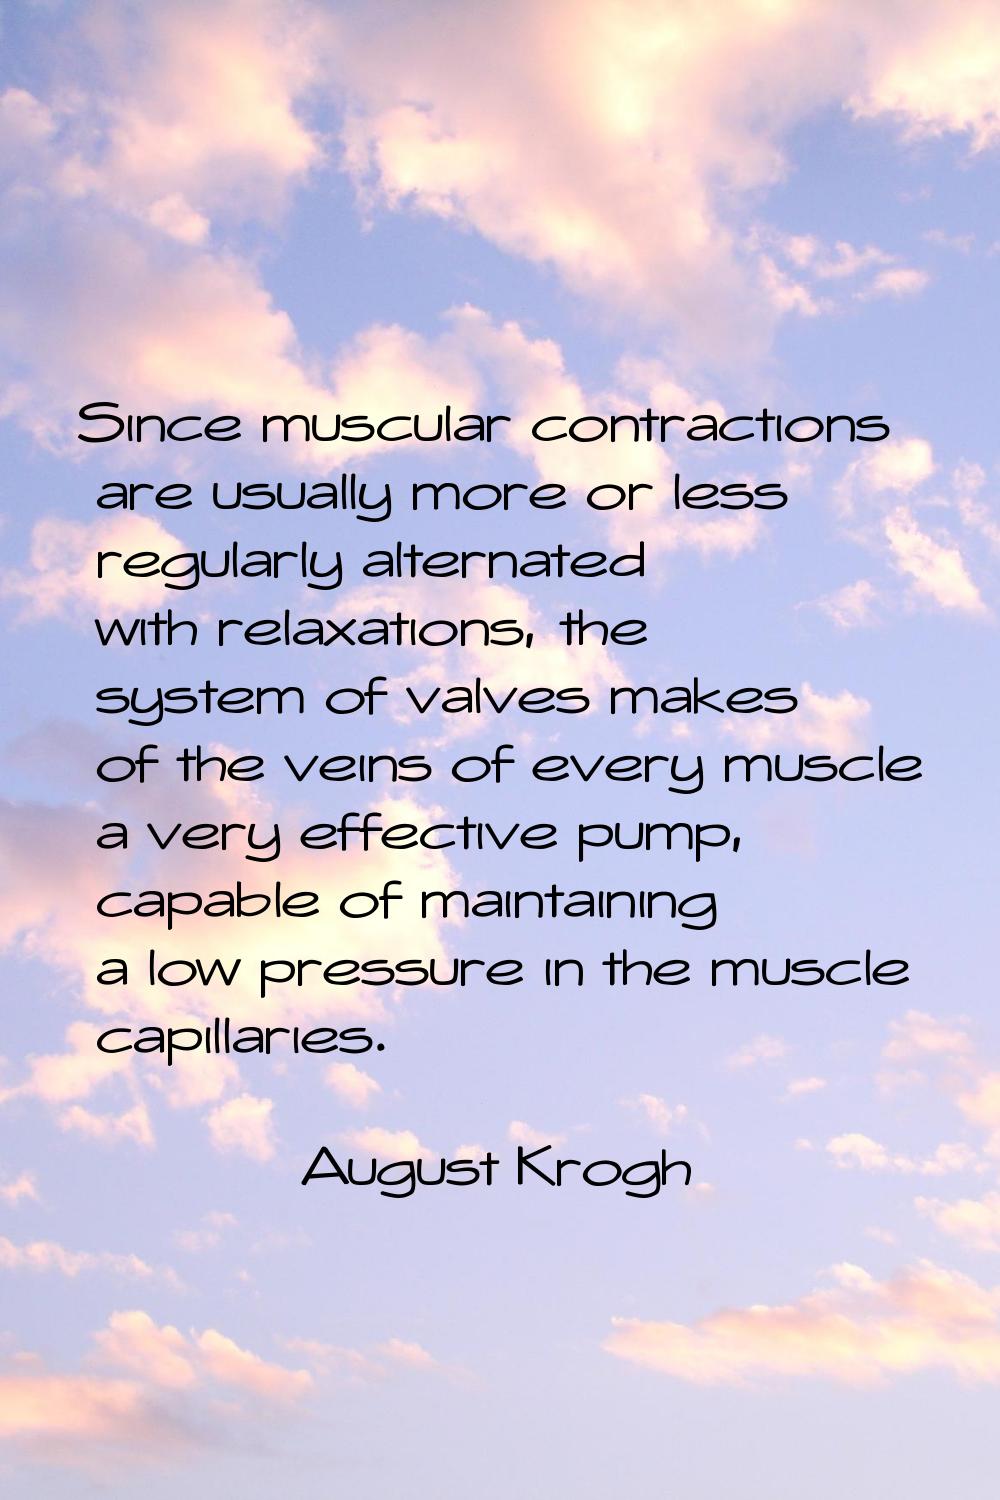 Since muscular contractions are usually more or less regularly alternated with relaxations, the sys